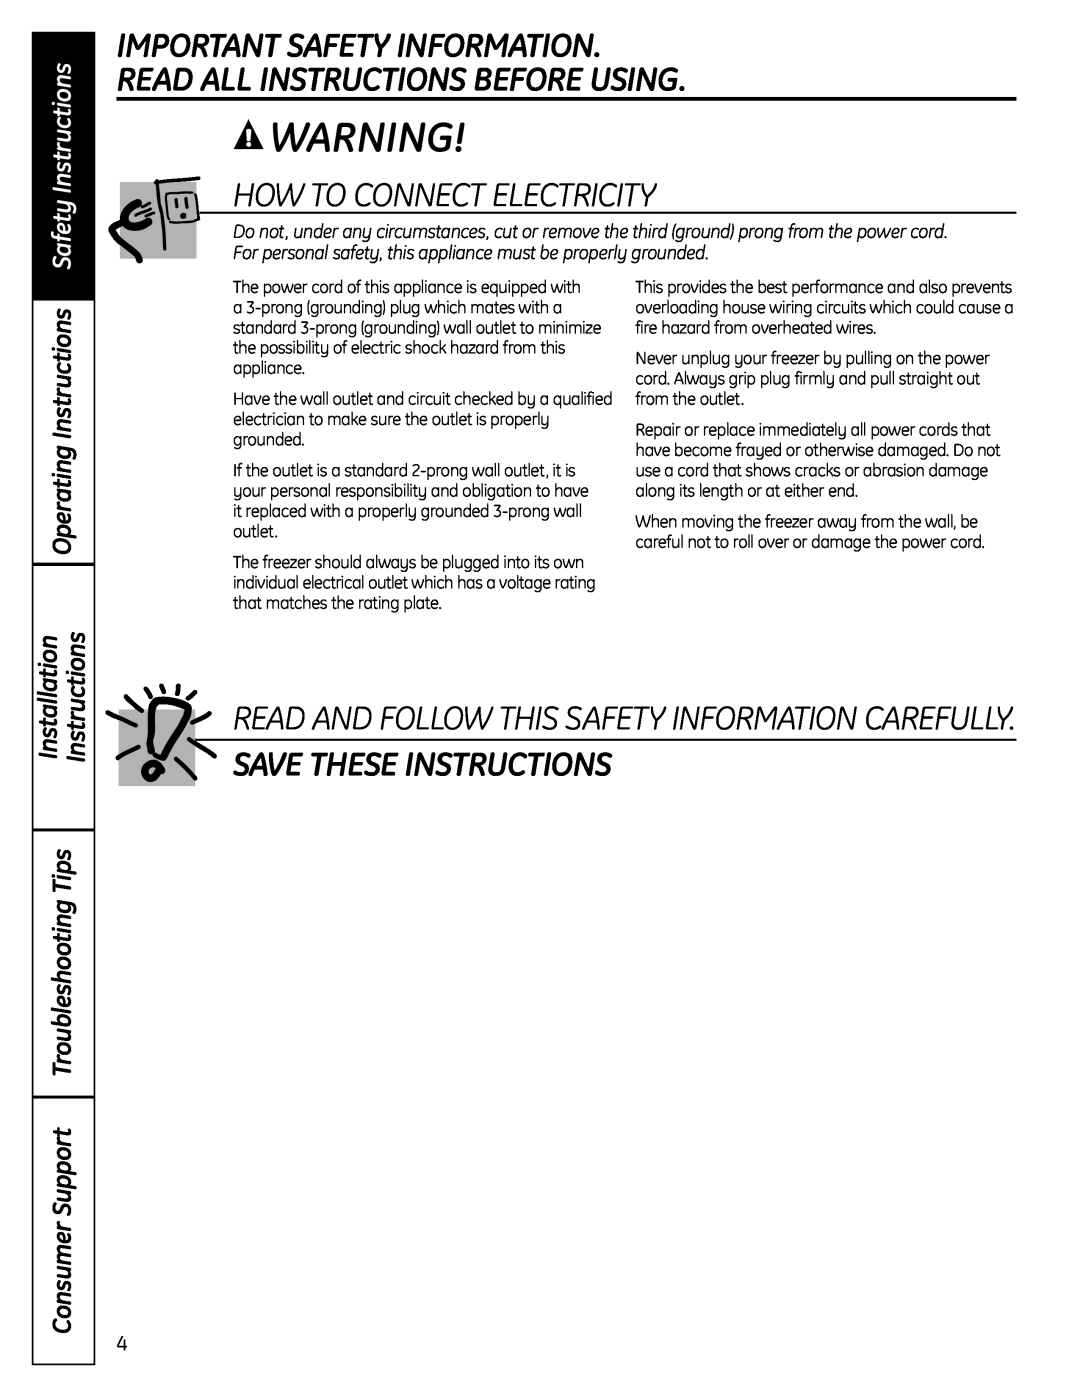 GE FUF17C, FUF21S How To Connect Electricity, Save These Instructions, Read And Follow This Safety Information Carefully 